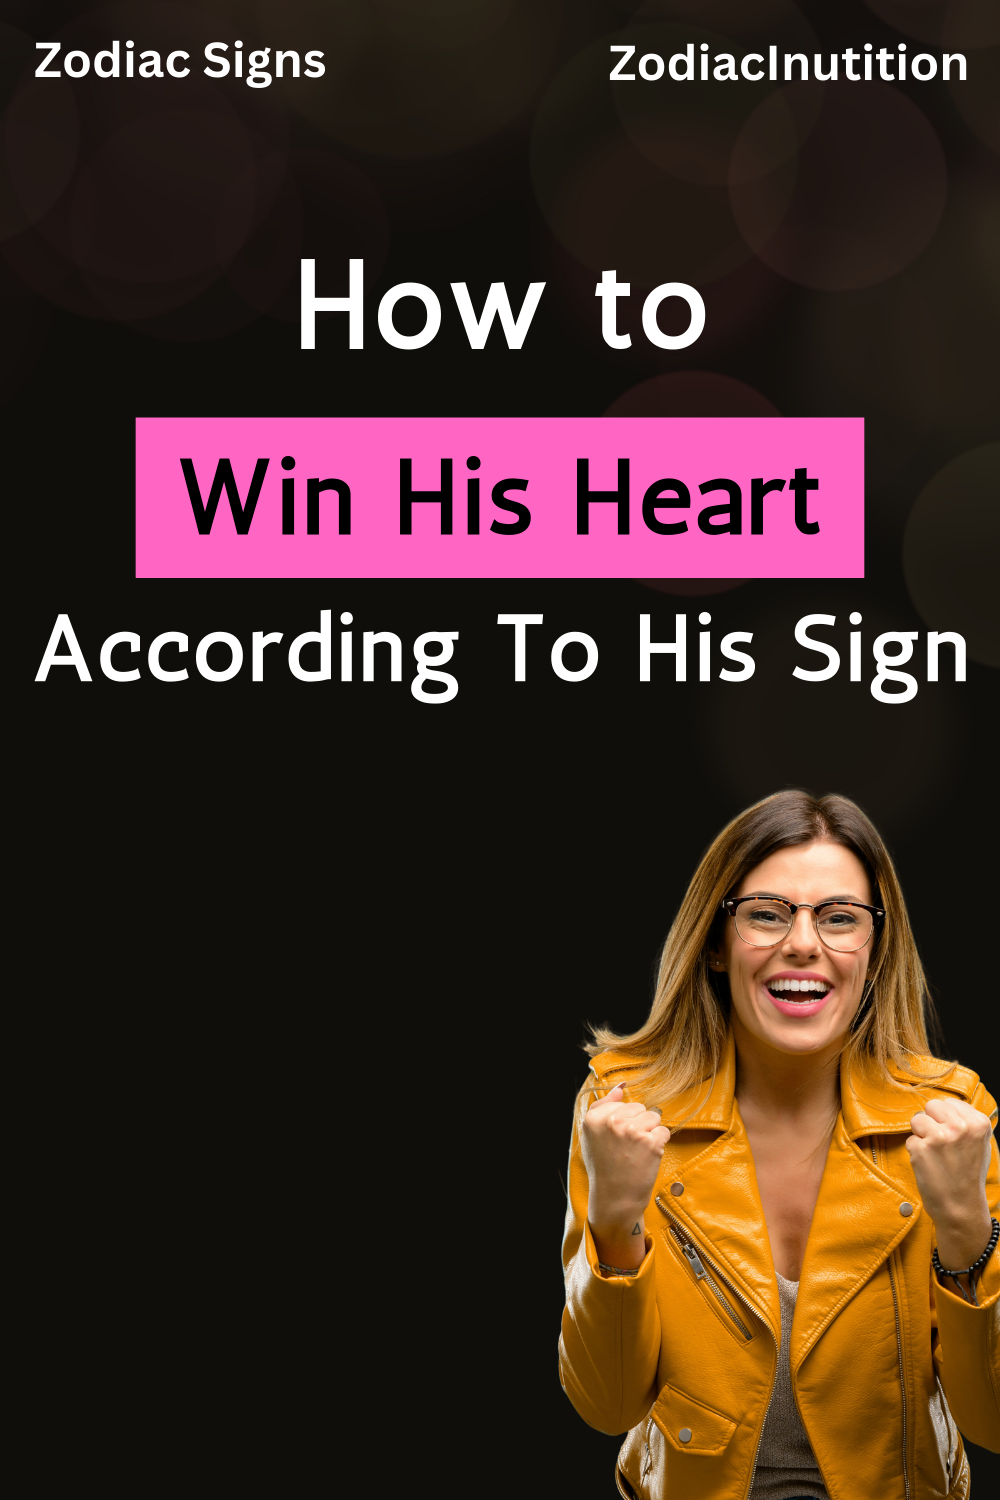 How to Win His Heart According to His Zodiac Sign